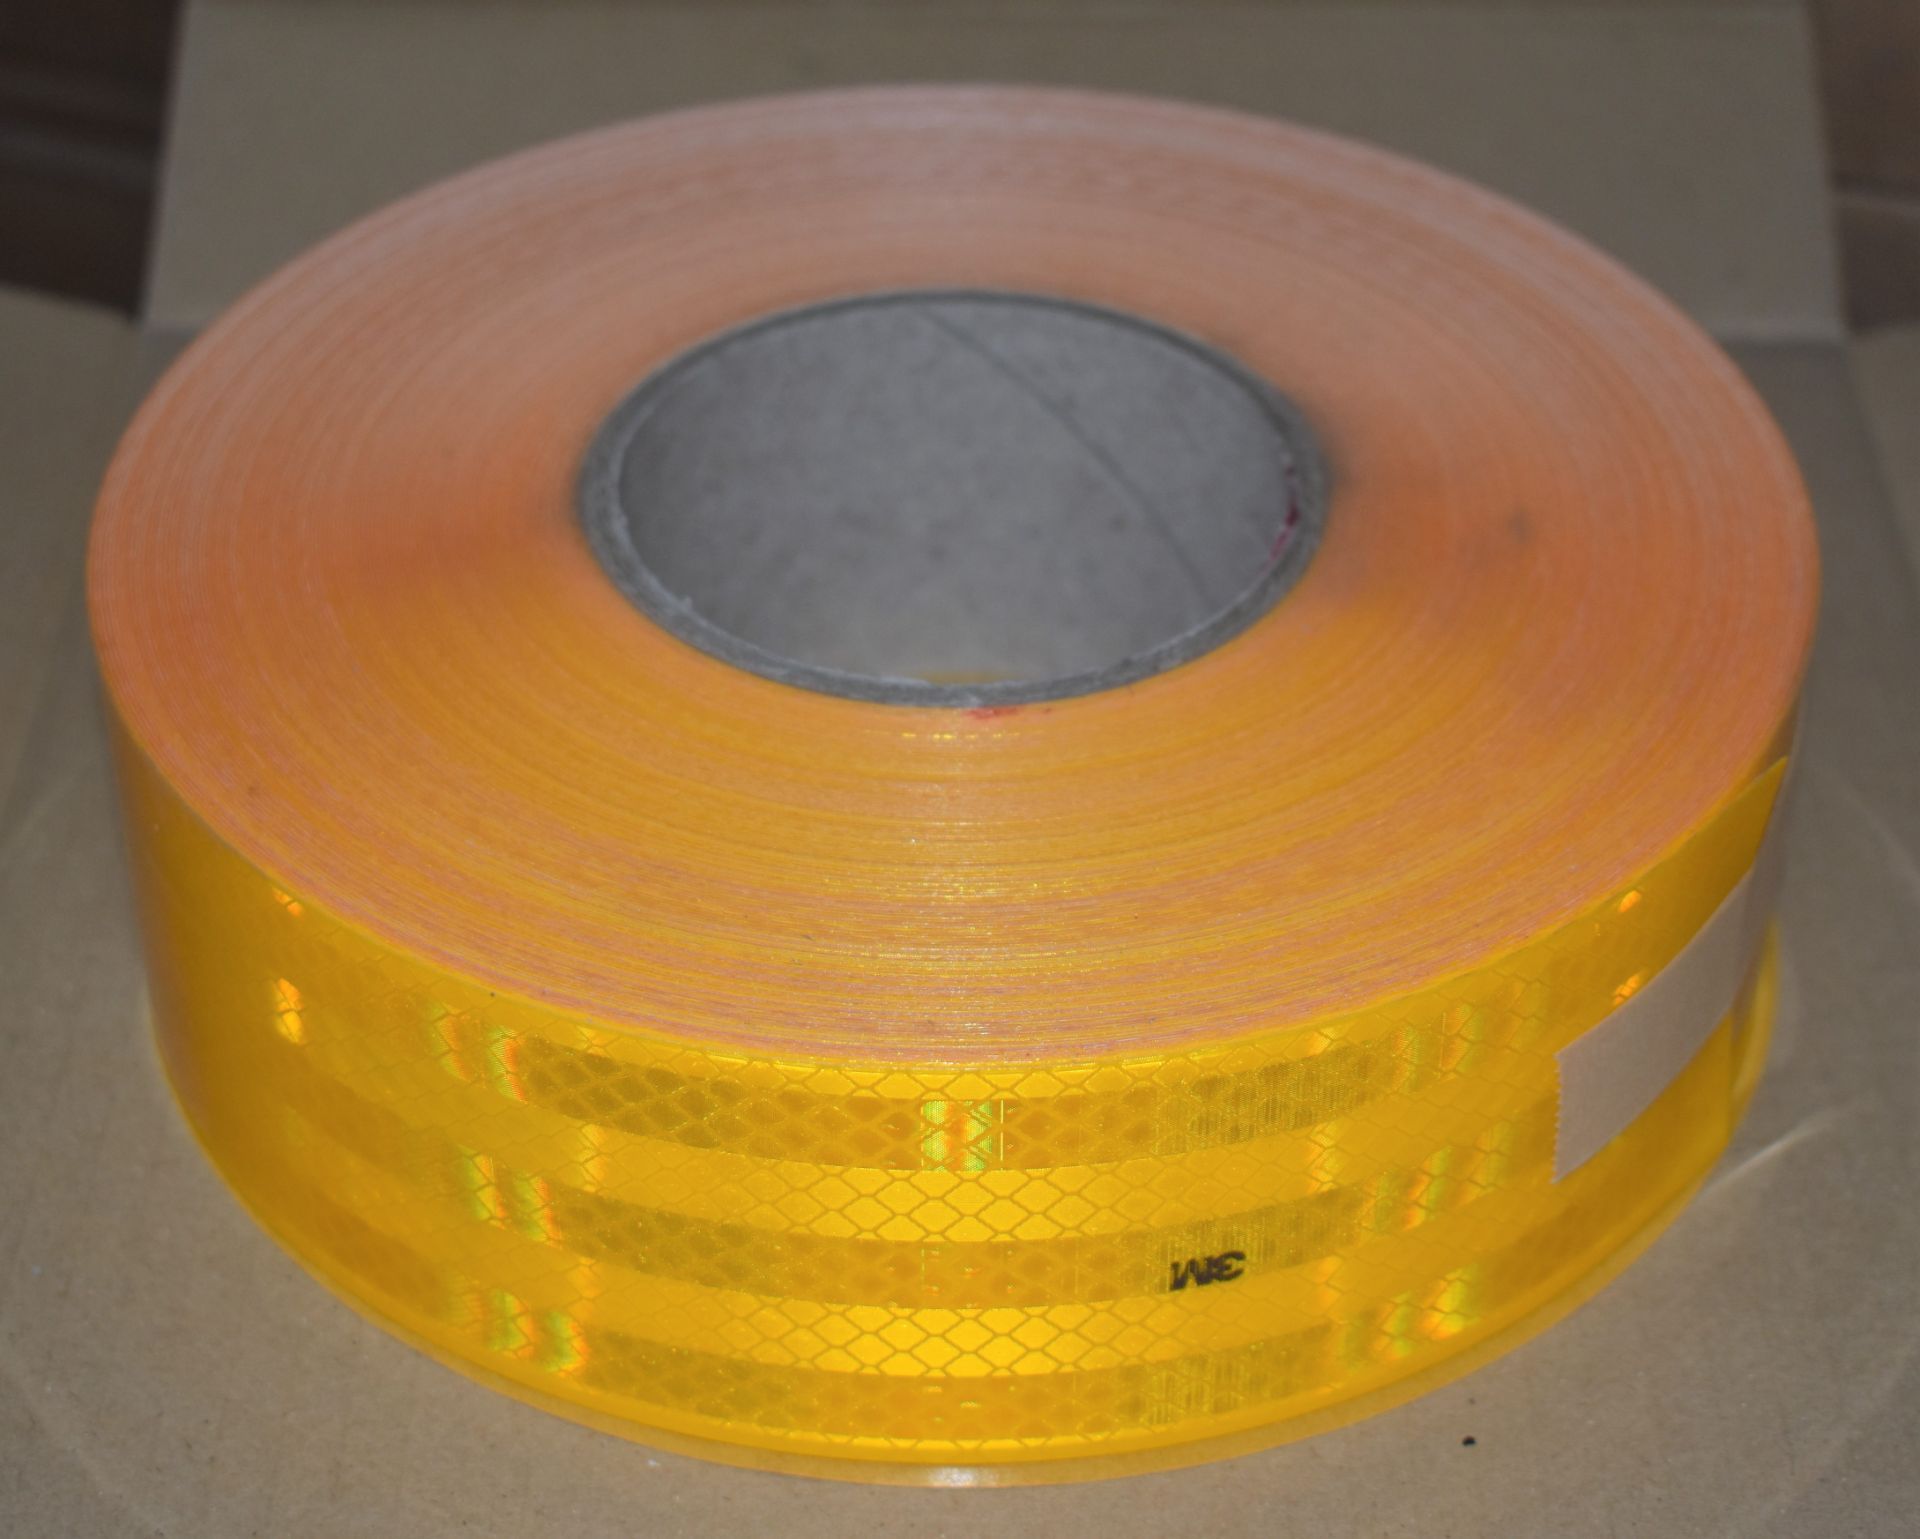 1 x Roll of 3M Conspicuity Tape Reflective Sheeting - Size 55mm x 50m - Diamond Grade - Colour - Image 2 of 5